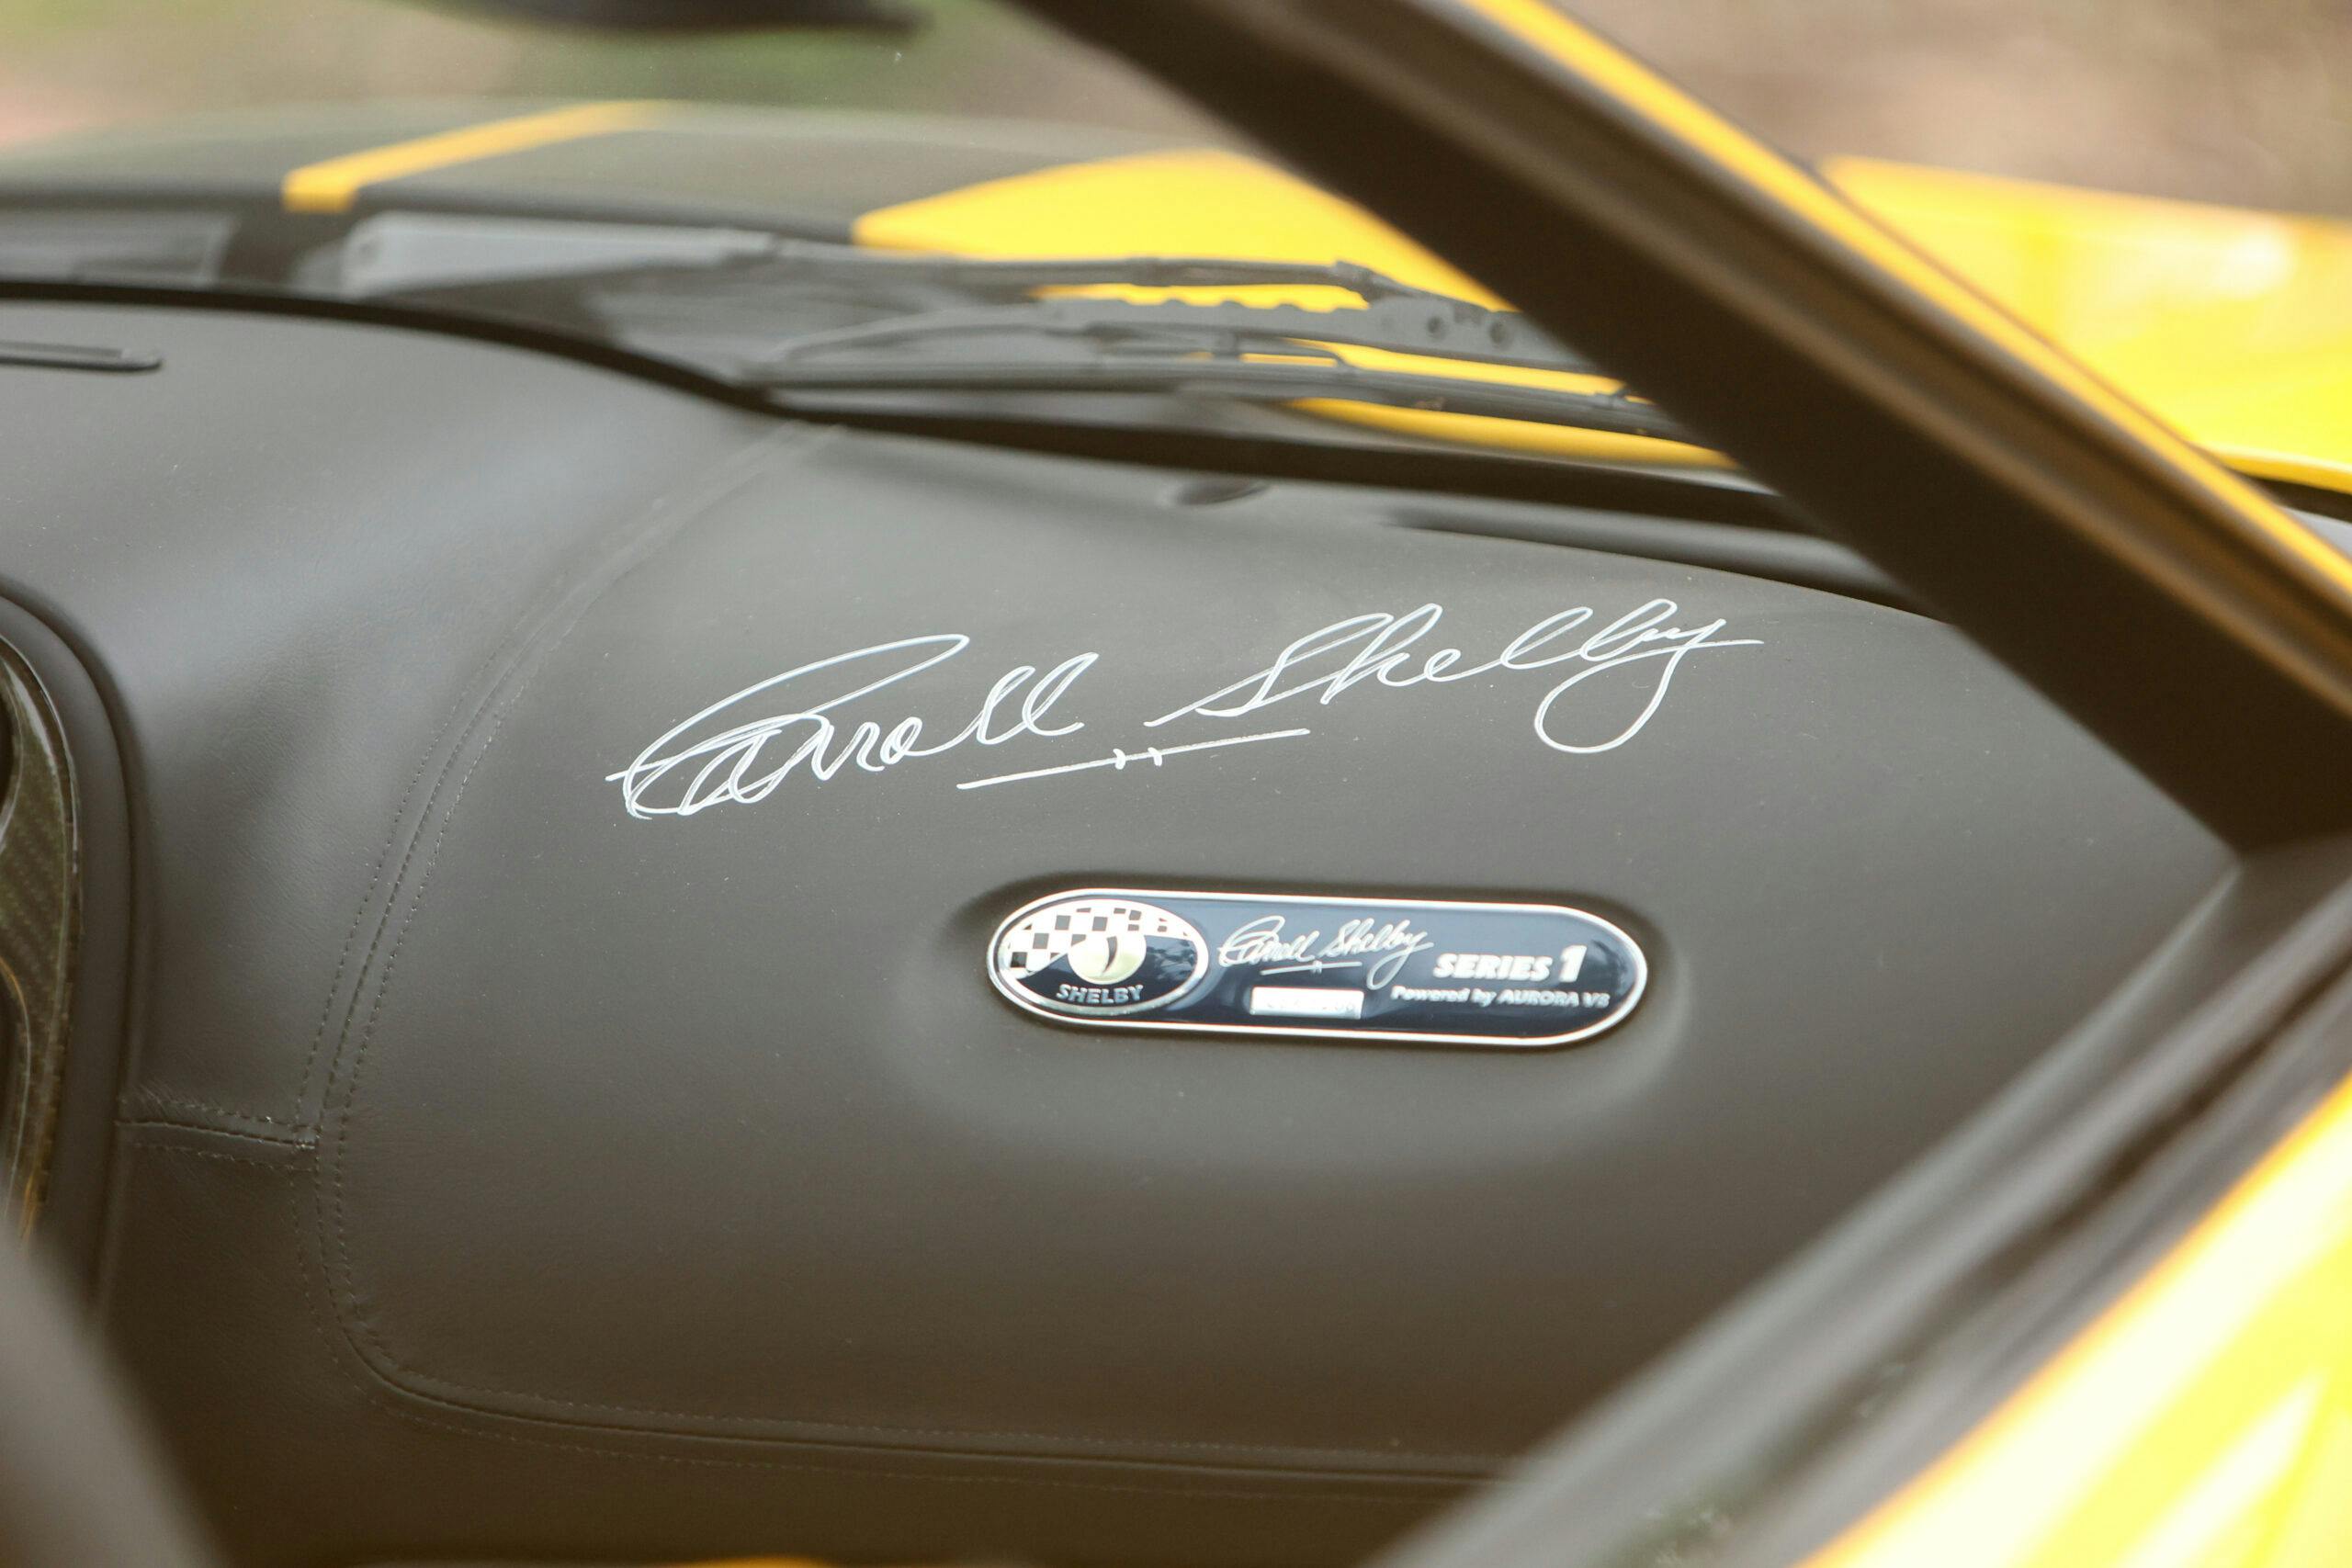 1999 Shelby Series 1 signed dash